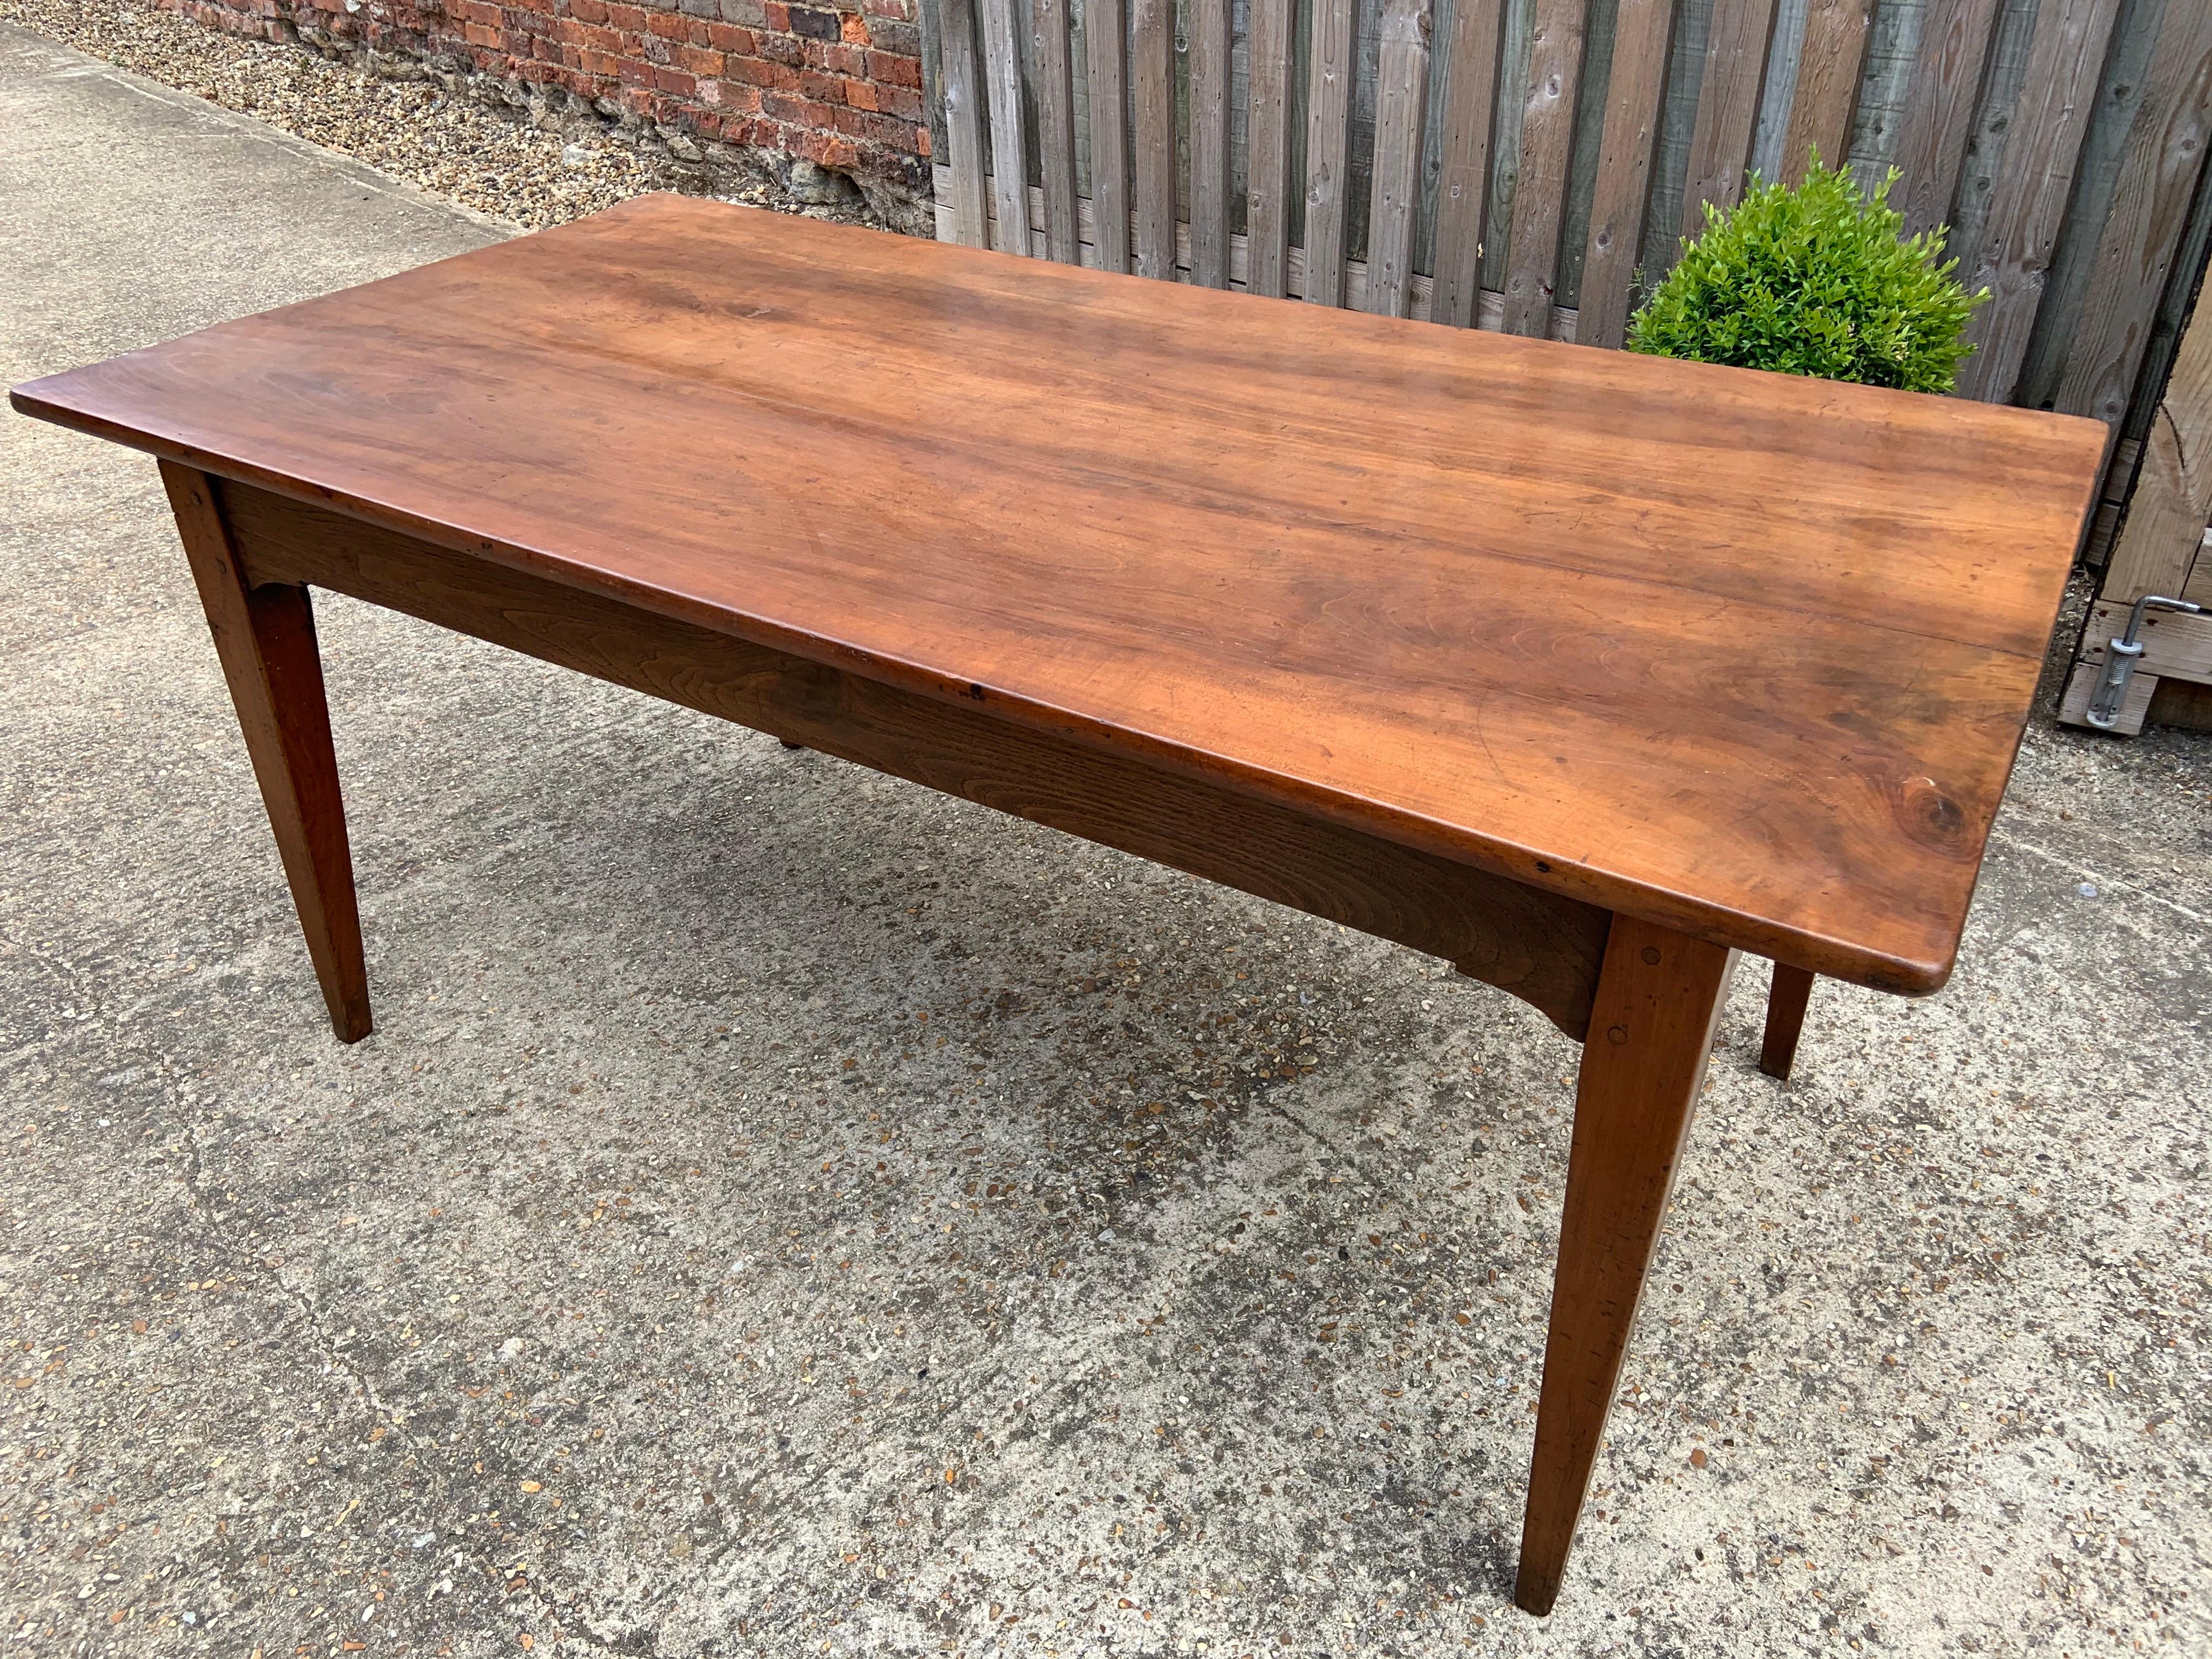 French Early 19th Century Wide Cherry Farmhouse Table With Slide and Tapered legs